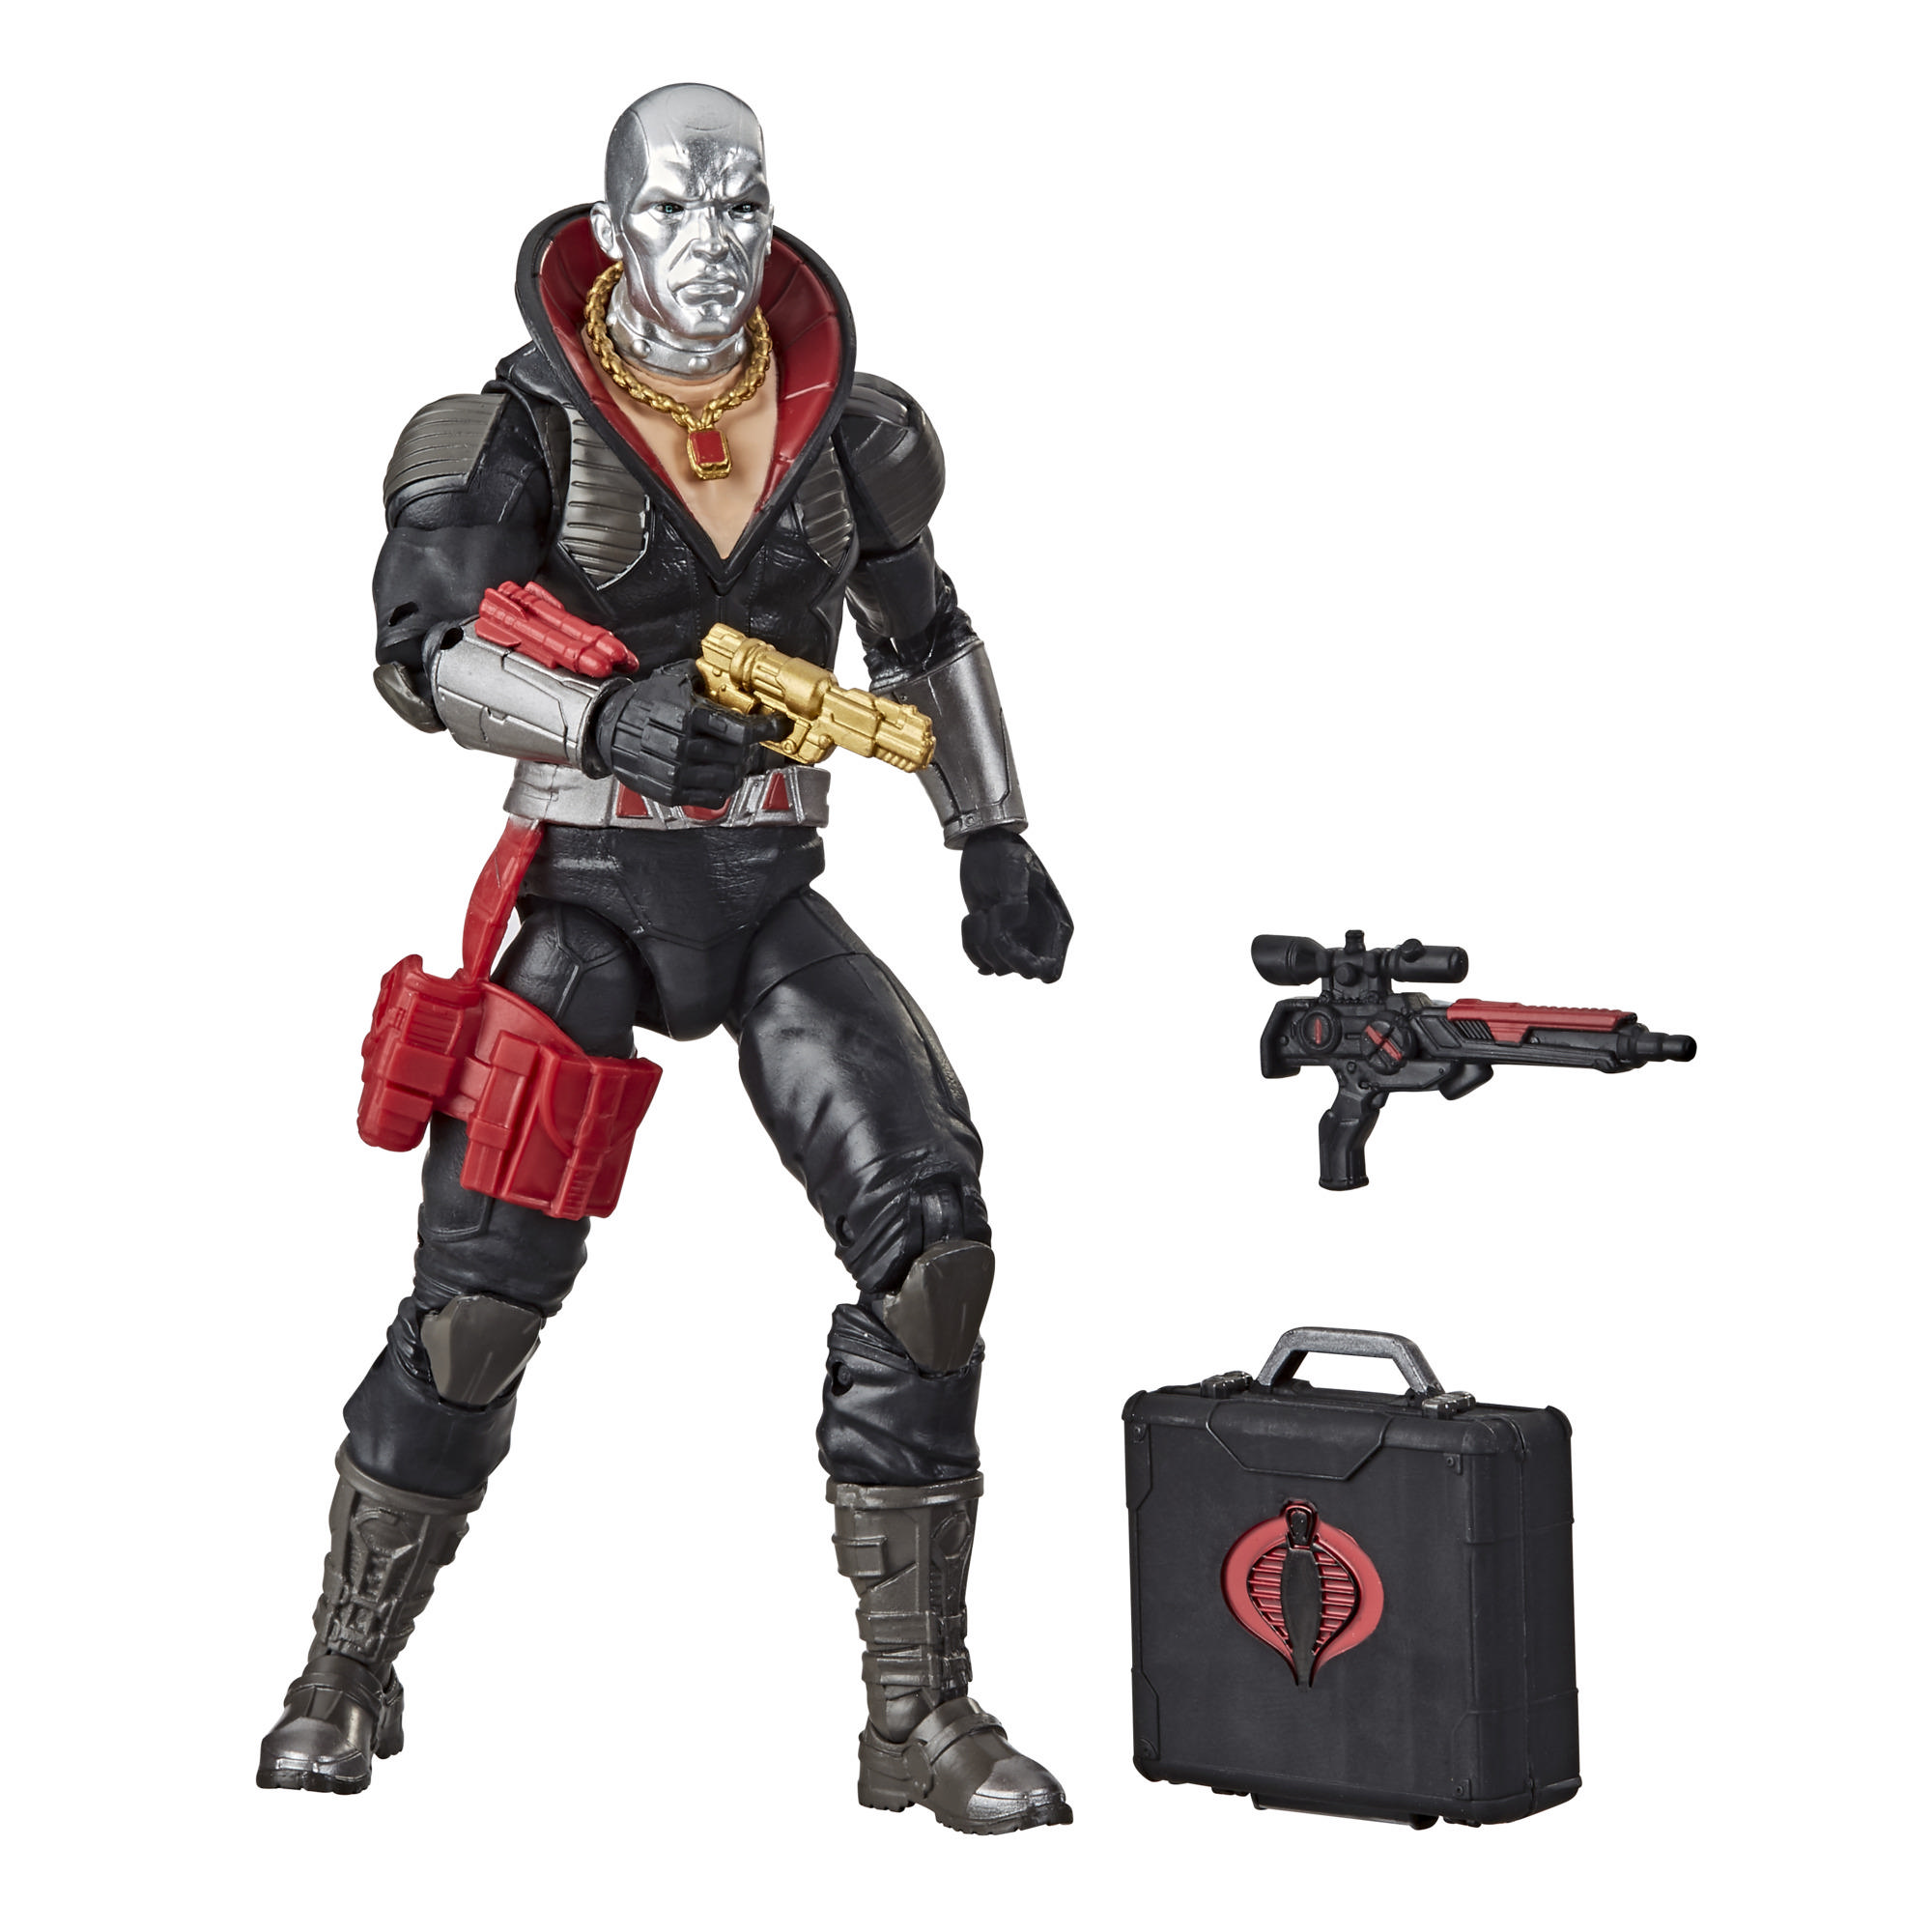 G.I. Joe Classified Series Destro Action Figure 03 Collectible Toy with Multiple Accessories